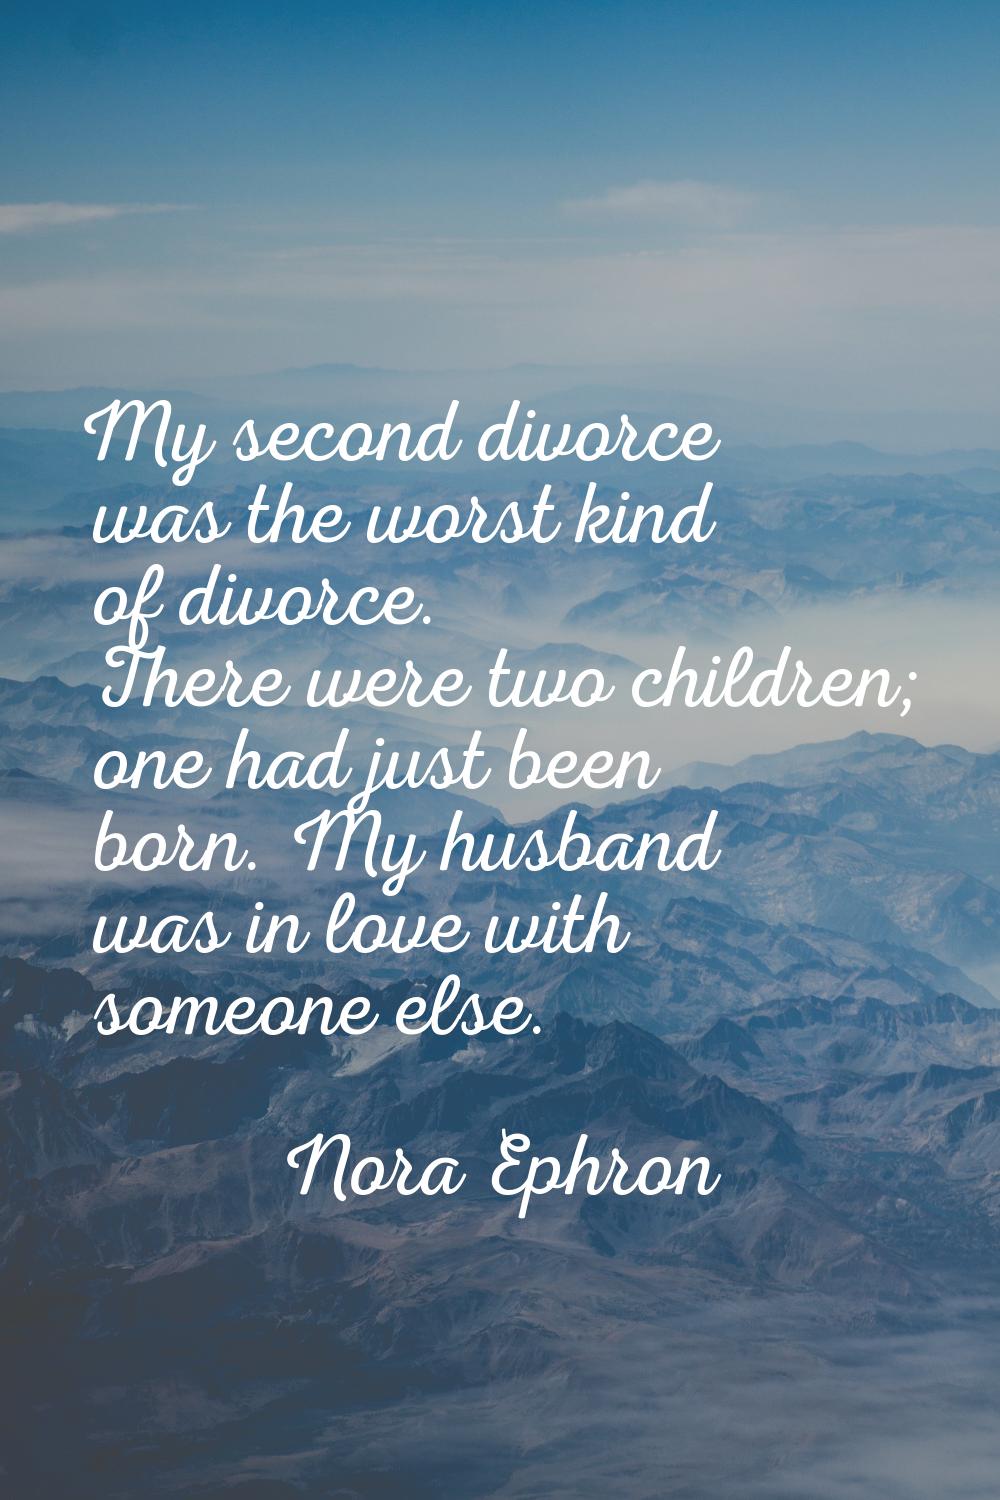 My second divorce was the worst kind of divorce. There were two children; one had just been born. M